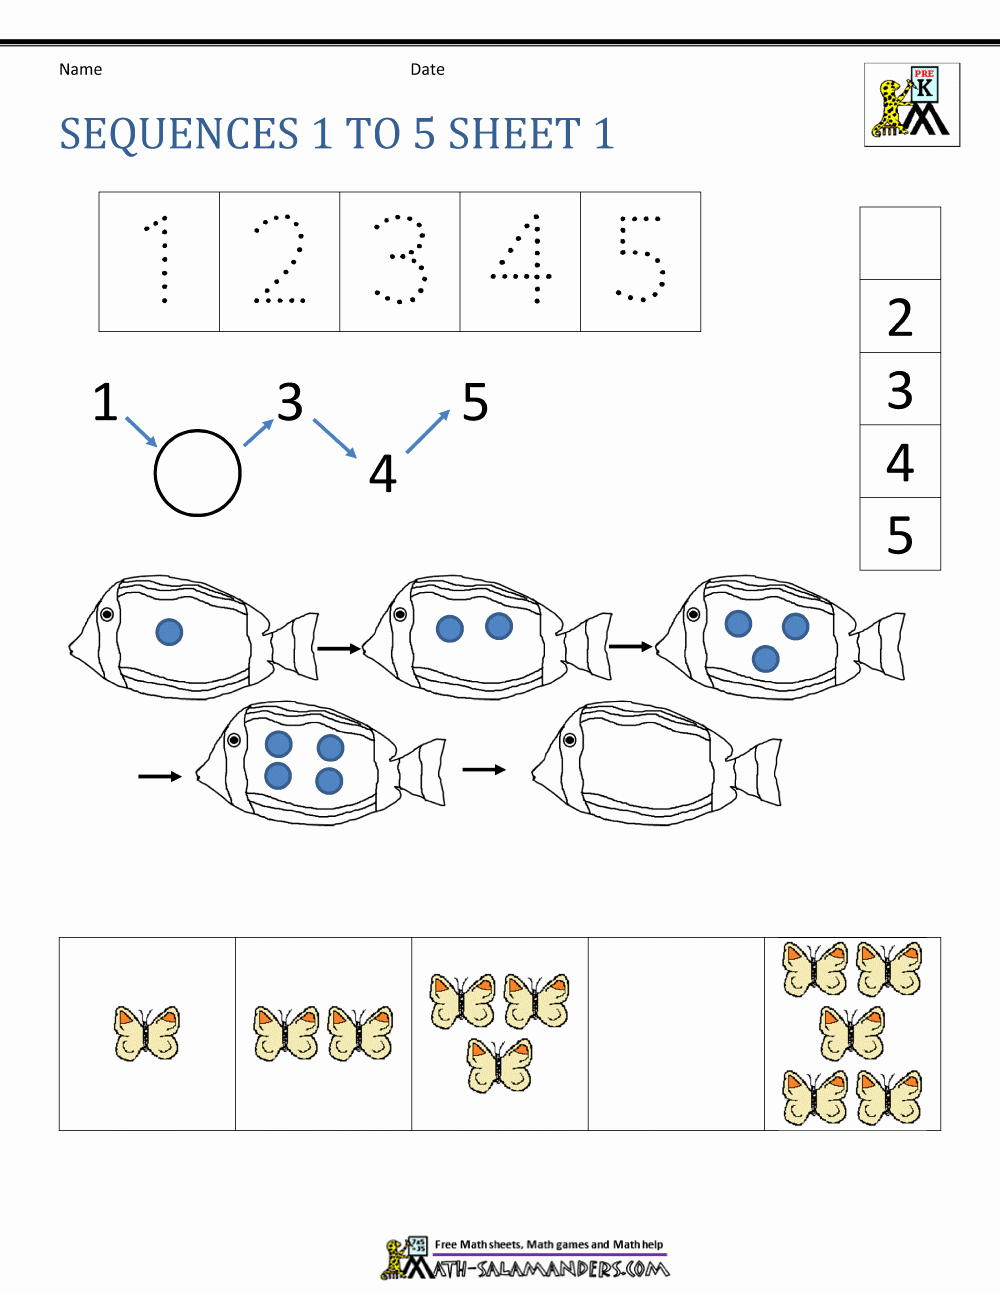 Printable Sequence Worksheets Inspirational Preschool Number Worksheets Sequencing to 10